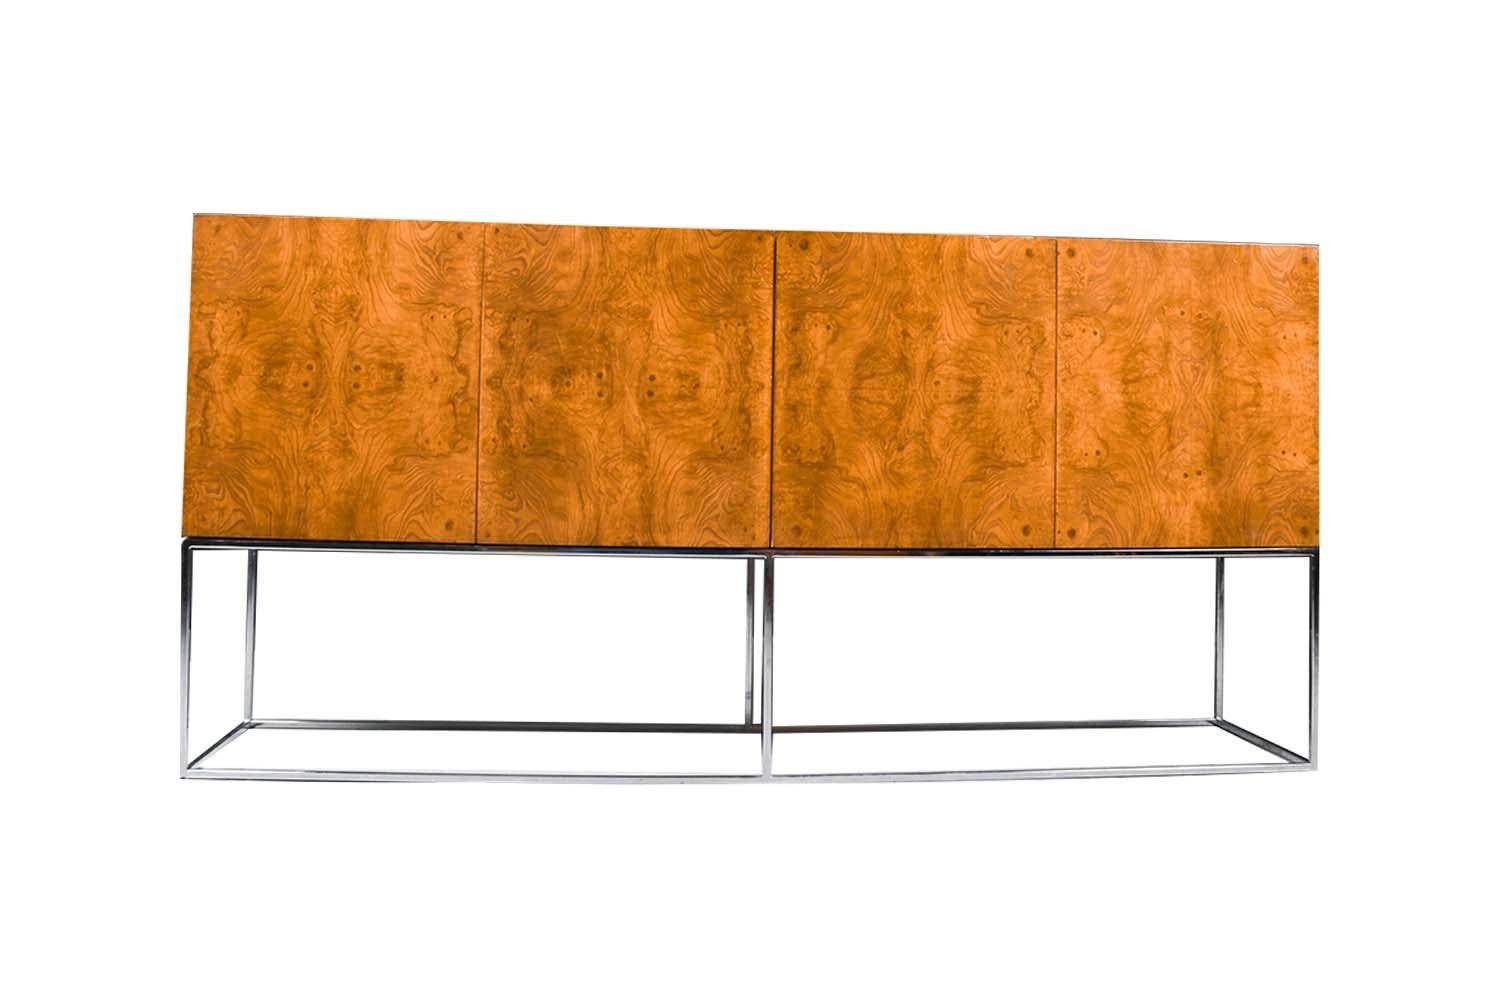 A stunning credenza / cabinet by Milo Baughman for Thayer Coggin, circa 1970’s. This exquisite piece features a beautiful burl wood finish with a simple chrome base and modern profile. The two double-door cabinets open by way of a spring latch for